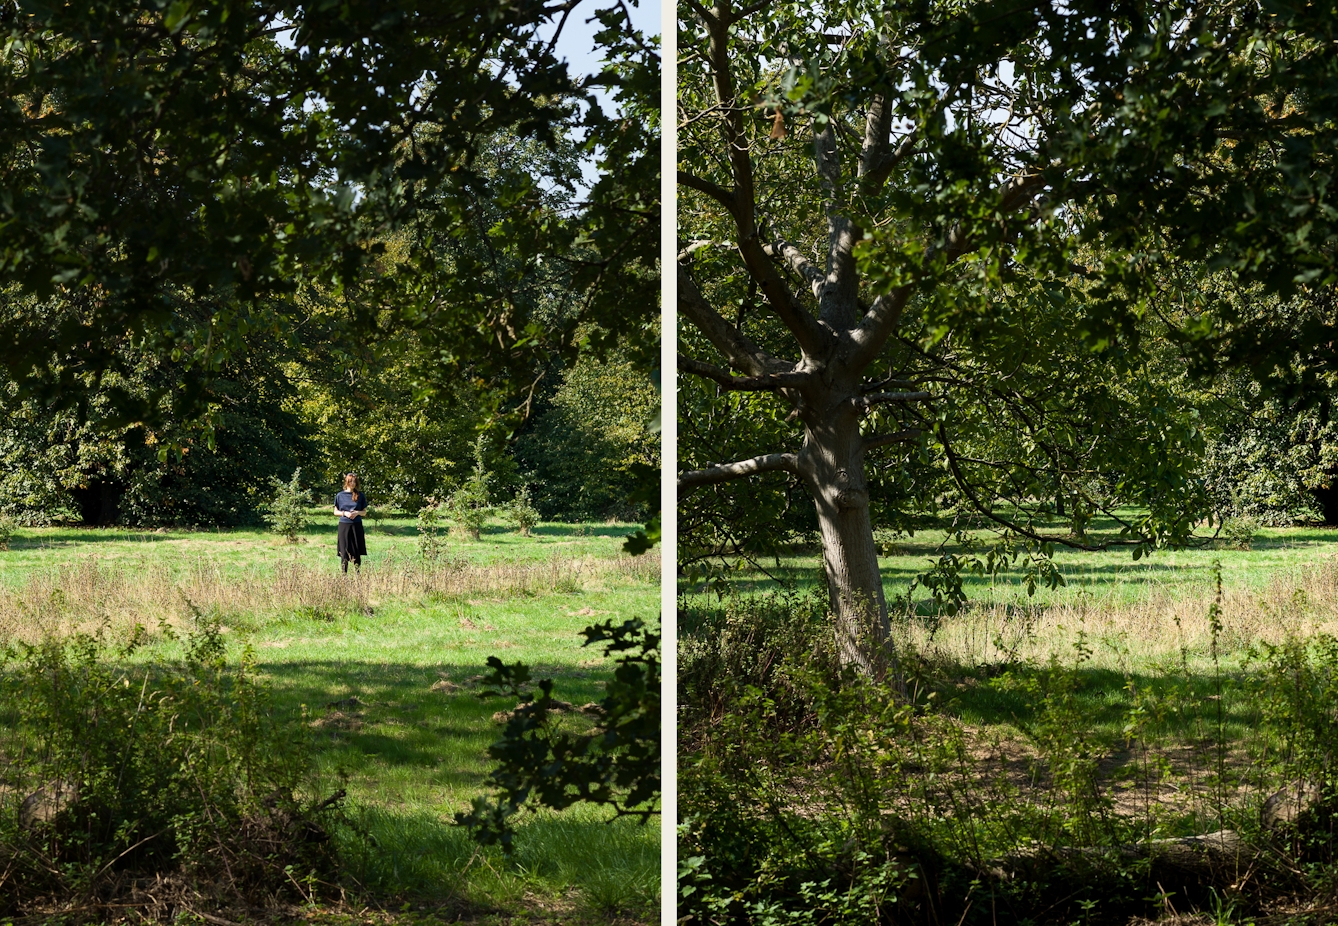 Photographic diptych. The image on the left shows a parkland scene in bright sunlight with the distant figure of a woman standing in the centre of the frame. She is surrounded by rough grassland. In the distance are large trees and in the foreground she is frames by the branches of more trees. The image on the right shows a wooded parkland scene made up of rough grassland and trees. The scene is in full sun, with some areas cast into dappled shade by the tree canopy.